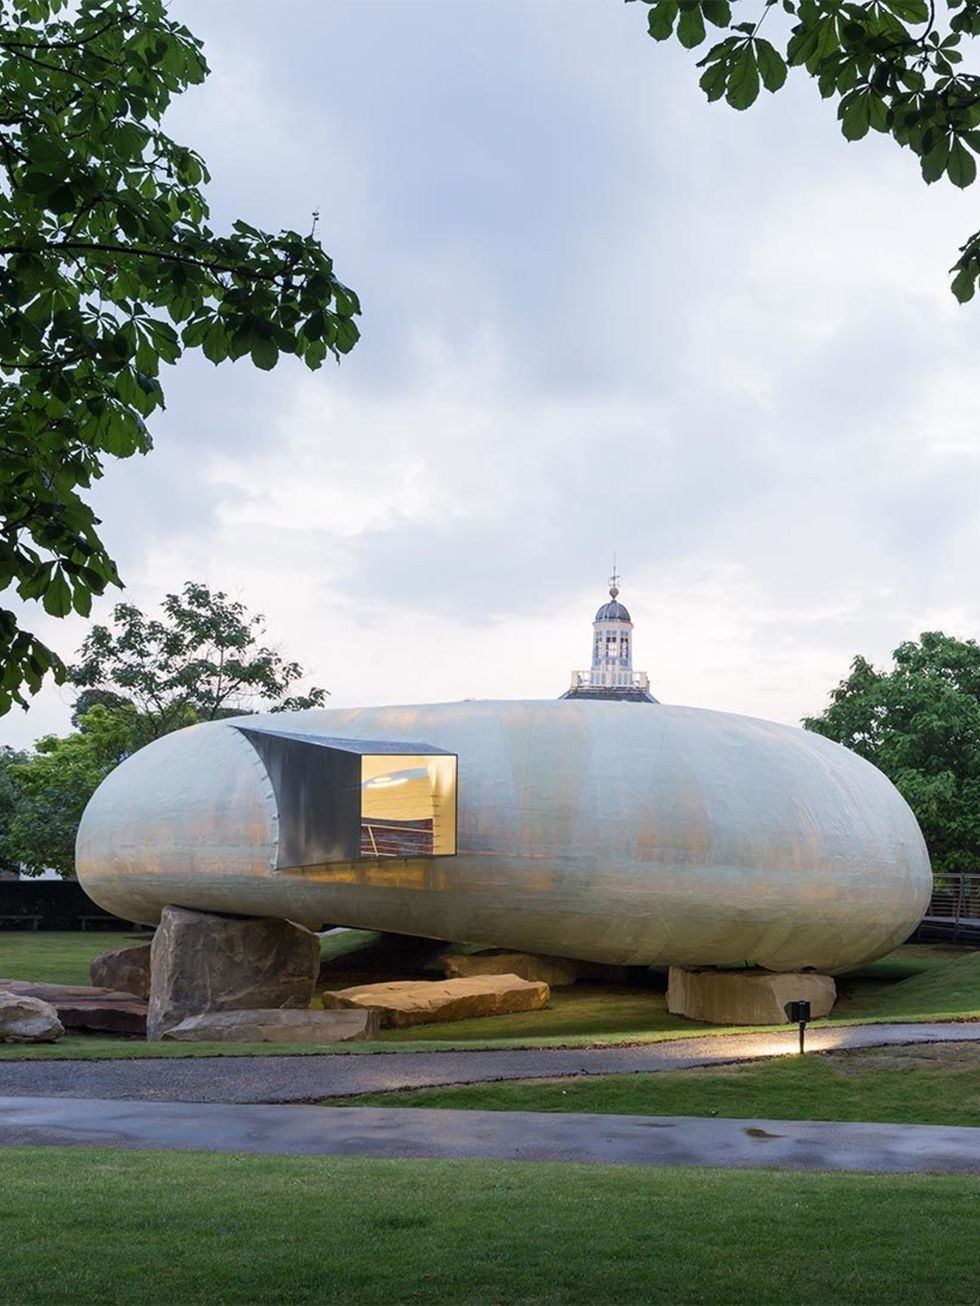 ART: Serpentine Galleries Pavilion

Escape from the bustle of the city to Kensington Gardens, where the Serpentine Galleries are hosting its annual Pavilion exhibition.

Featuring the Chilean architect Smiljan Radi?, whos built a sensory temporary pav